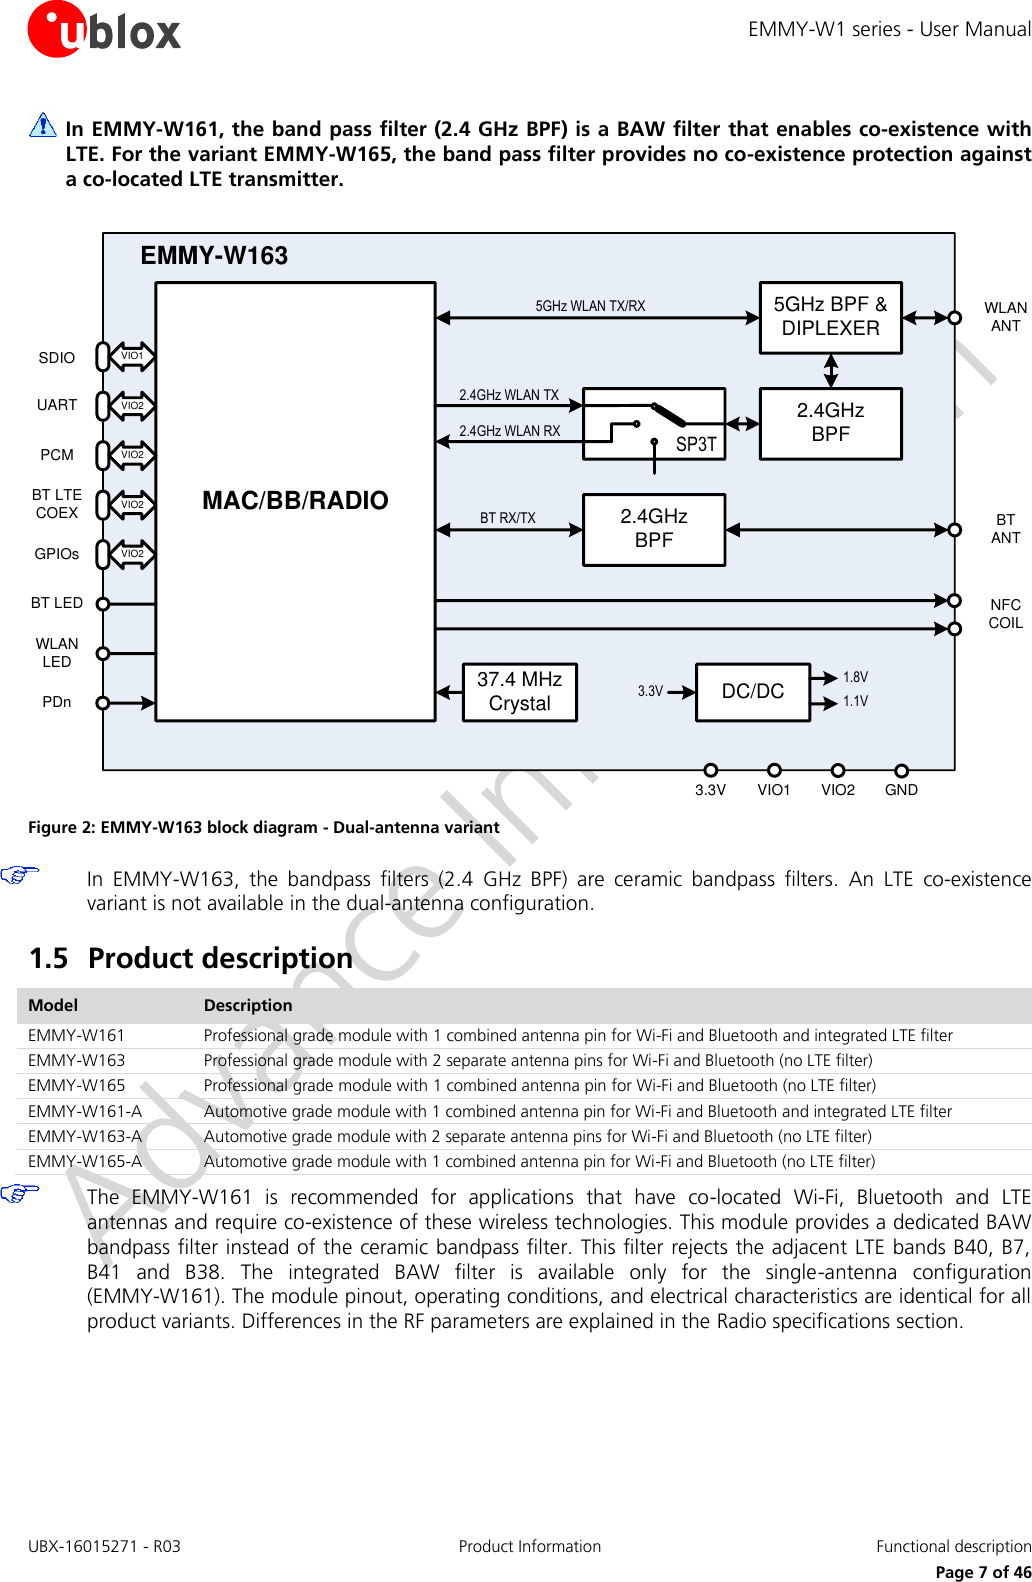 EMMY-W1 series - User Manual UBX-16015271 - R03 Product Information  Functional description     Page 7 of 46  In EMMY-W161, the band pass filter (2.4 GHz BPF) is a BAW filter that enables co-existence with LTE. For the variant EMMY-W165, the band pass filter provides no co-existence protection against a co-located LTE transmitter.   Figure 2: EMMY-W163 block diagram - Dual-antenna variant  In  EMMY-W163,  the  bandpass  filters  (2.4  GHz  BPF)  are  ceramic  bandpass  filters.  An  LTE  co-existence variant is not available in the dual-antenna configuration. 1.5 Product description Model Description EMMY-W161 Professional grade module with 1 combined antenna pin for Wi-Fi and Bluetooth and integrated LTE filter EMMY-W163 Professional grade module with 2 separate antenna pins for Wi-Fi and Bluetooth (no LTE filter)  EMMY-W165 Professional grade module with 1 combined antenna pin for Wi-Fi and Bluetooth (no LTE filter)  EMMY-W161-A Automotive grade module with 1 combined antenna pin for Wi-Fi and Bluetooth and integrated LTE filter EMMY-W163-A Automotive grade module with 2 separate antenna pins for Wi-Fi and Bluetooth (no LTE filter) EMMY-W165-A Automotive grade module with 1 combined antenna pin for Wi-Fi and Bluetooth (no LTE filter)  The  EMMY-W161  is  recommended  for  applications  that  have  co-located  Wi-Fi,  Bluetooth  and  LTE antennas and require co-existence of these wireless technologies. This module provides a dedicated BAW bandpass filter instead of the ceramic bandpass filter. This filter rejects the adjacent LTE bands B40, B7, B41  and  B38.  The  integrated  BAW  filter  is  available  only  for  the  single-antenna  configuration (EMMY-W161). The module pinout, operating conditions, and electrical characteristics are identical for all product variants. Differences in the RF parameters are explained in the Radio specifications section.  MAC/BB/RADIO2.4GHz WLAN TX2.4GHz WLAN RXBT RX/TXWLANANT5GHz WLAN TX/RX 5GHz BPF &amp;DIPLEXER2.4GHzBPFEMMY-W163SDIO37.4 MHzCrystalVIO1UART VIO2PCM VIO2BT LTE COEX VIO2BT LEDWLAN LEDPDn2.4GHzBPFSP3T3.3V VIO1 VIO2 GNDNFCCOILBTANTVIO2GPIOsDC/DC3.3V1.8V1.1V